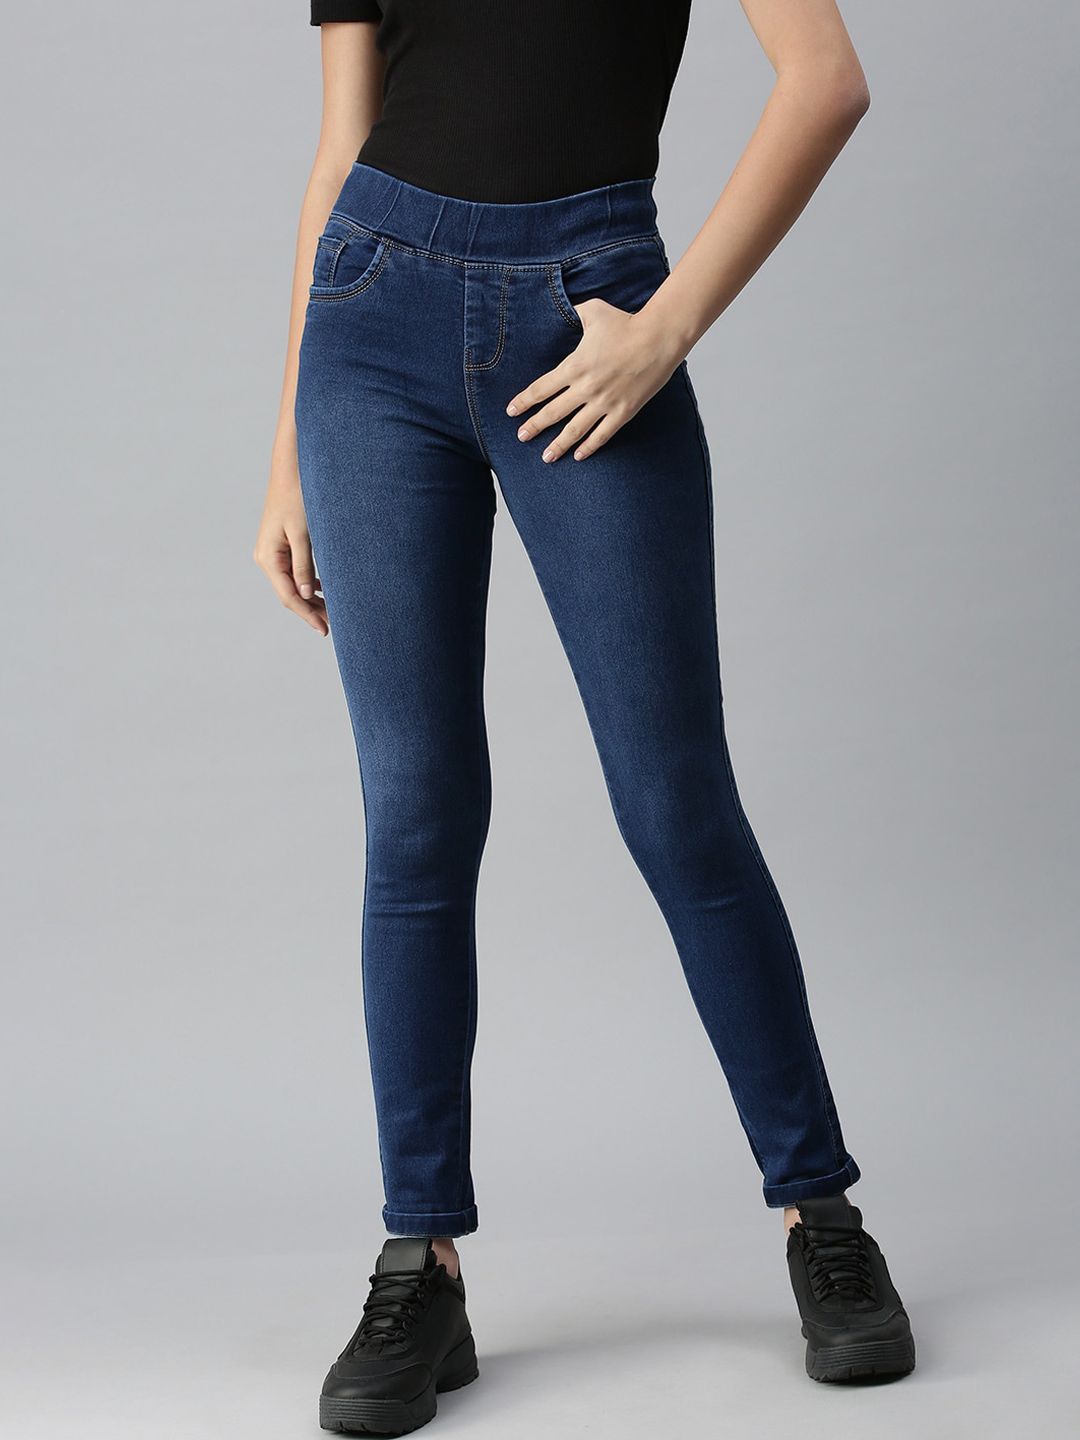 SHOWOFF Women Navy Blue Jean Skinny Fit High-Rise Stretchable Jeans Price in India